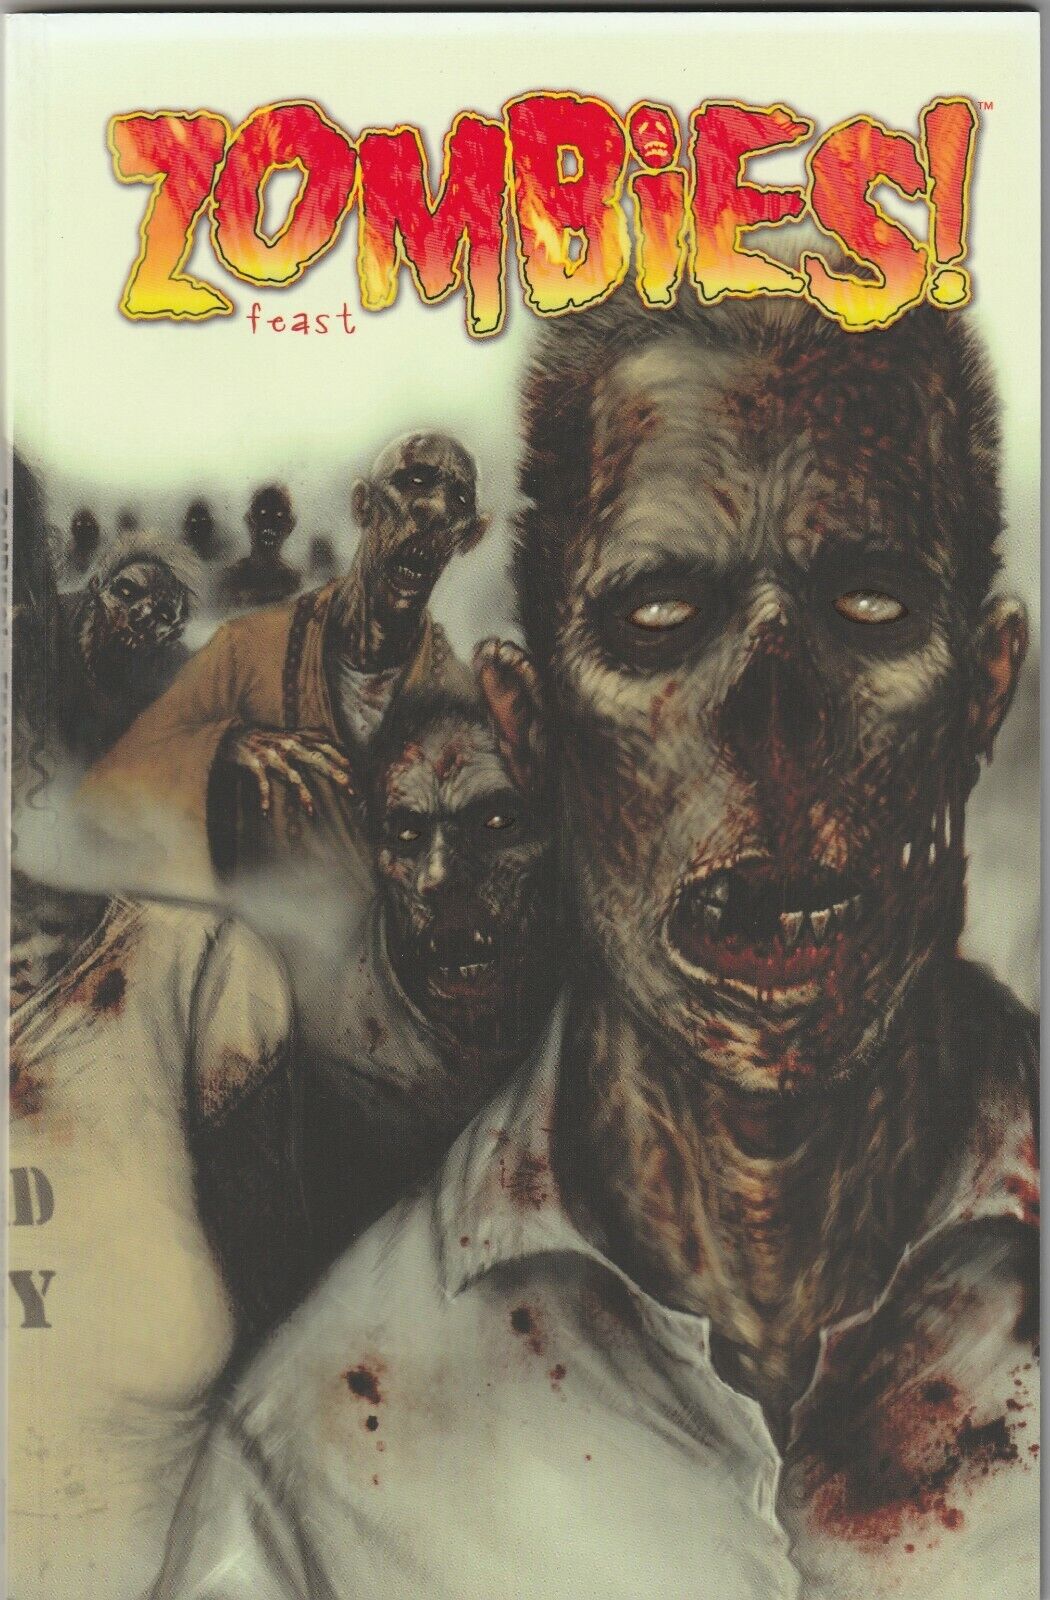 IDW tpb Zombies Feast  - 2007 first printing - retail 19.99, McCarthy /Bolton